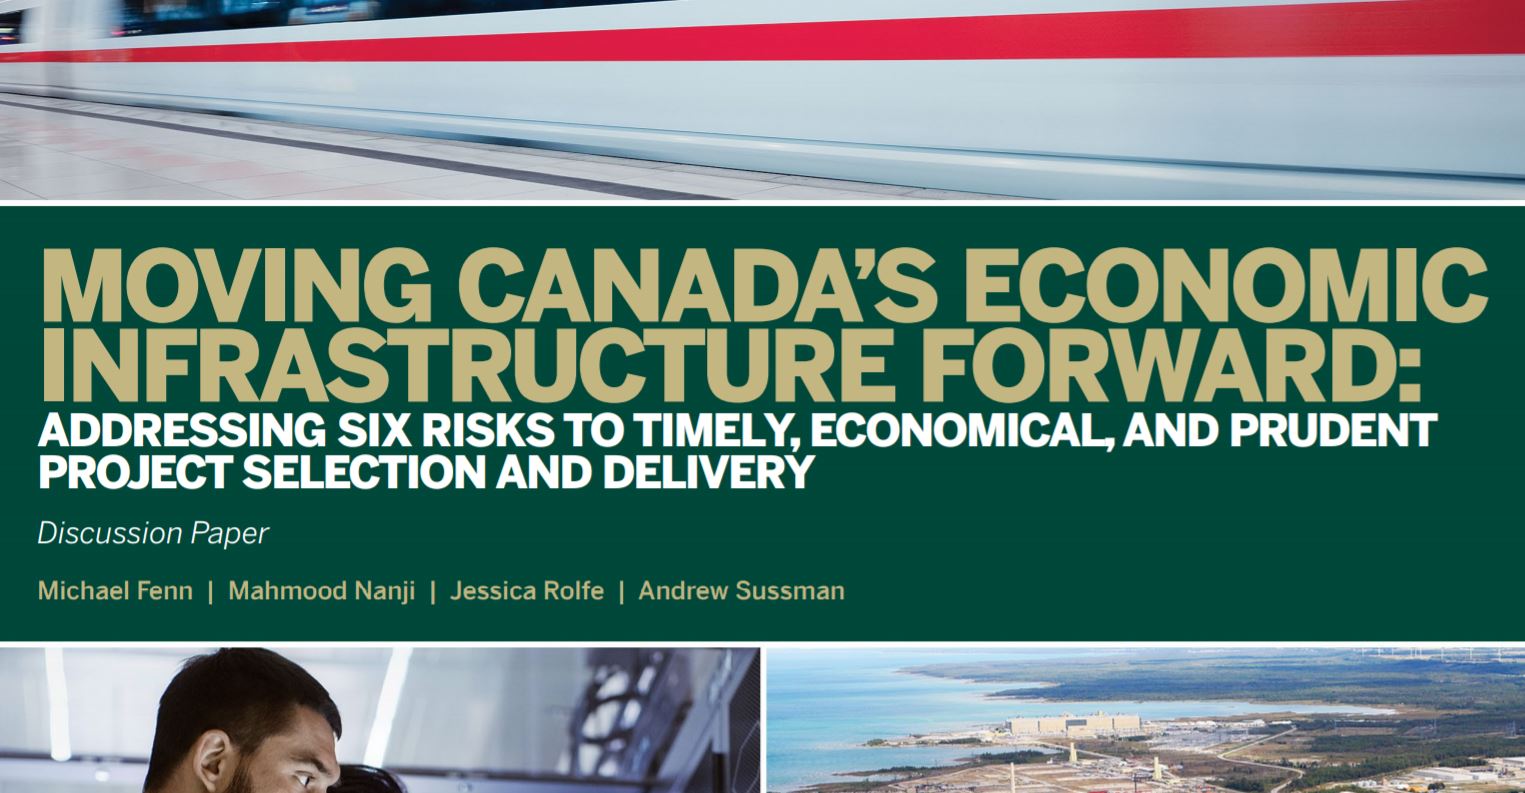 Moving Canada's Economic Infrastructure Forward: Addressing Six Risks to Timely, Economical and Prudent Project Selection and Delivery